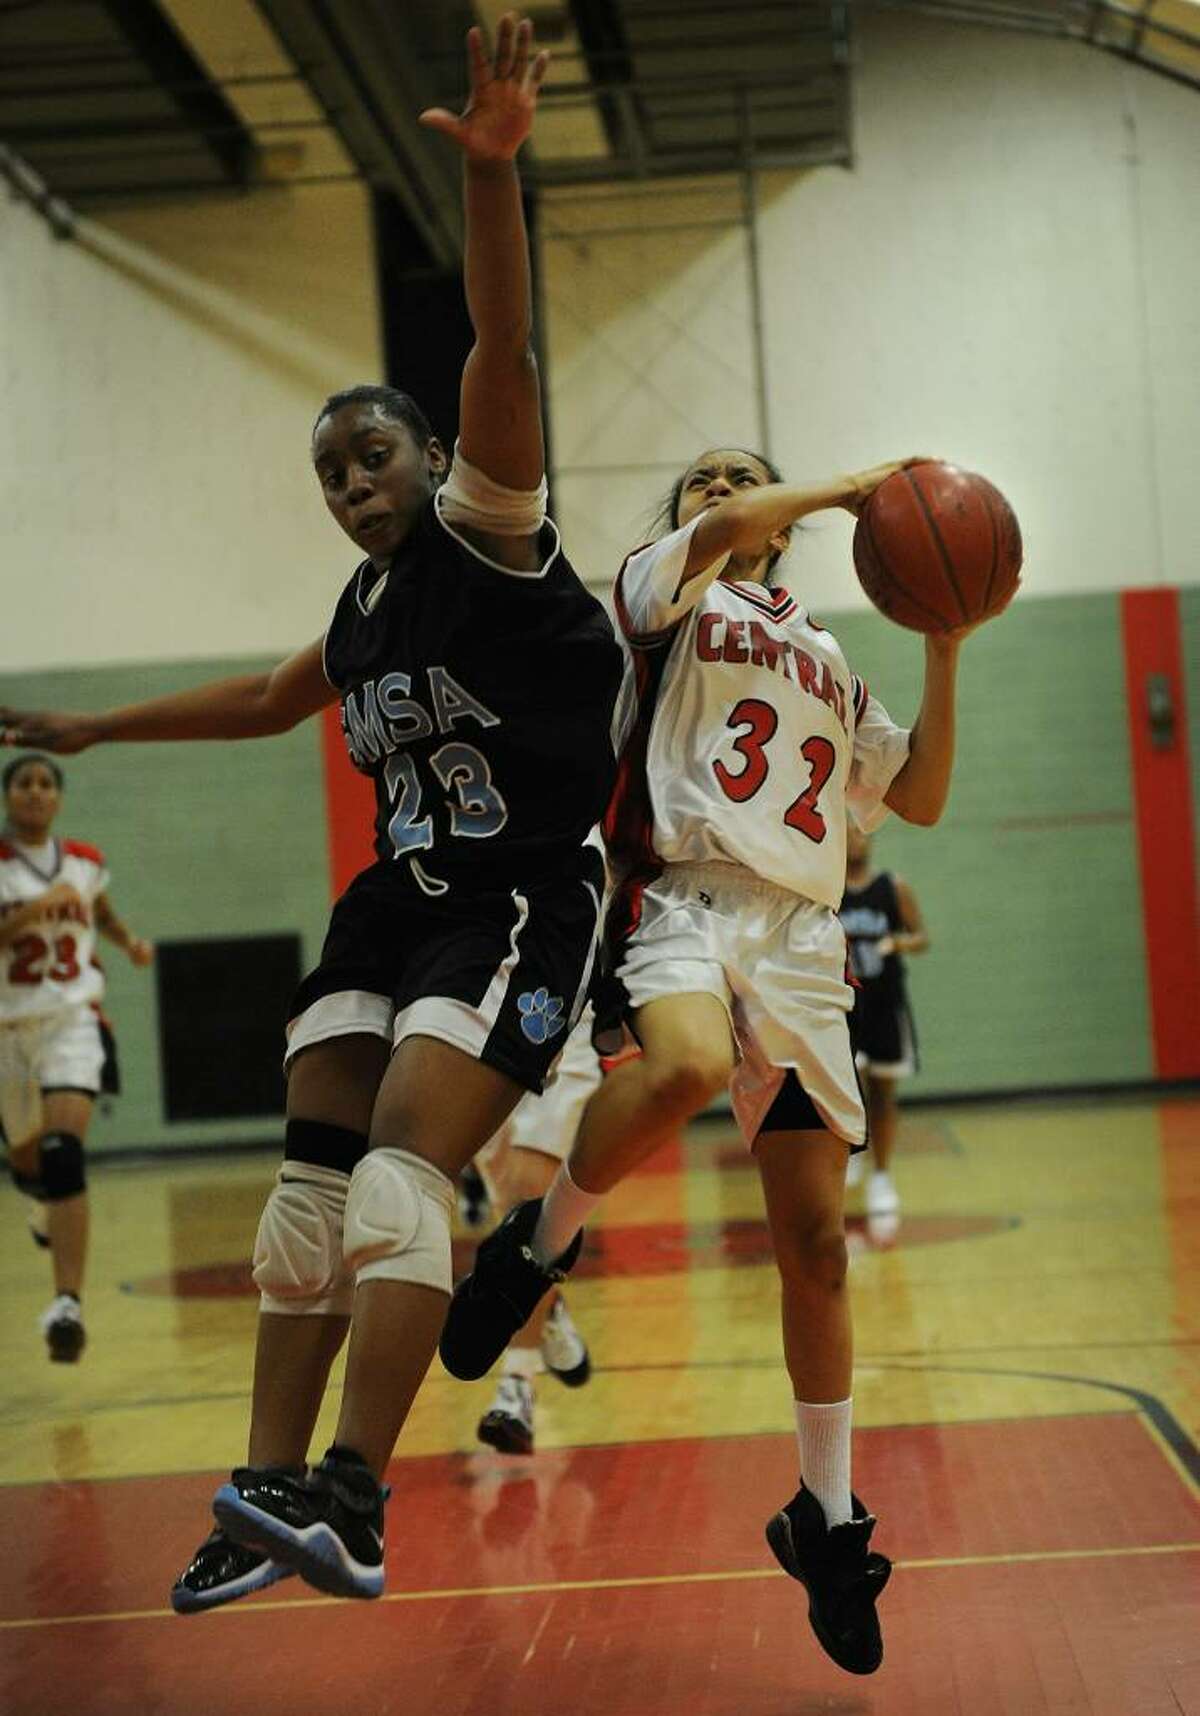 Bridgeport Central's Amber James, right drives to the basket on a fast break against SMSA defender Chelsea Bourne during Monday's matchup at Central High School in Bridgeport, January 25, 2010.